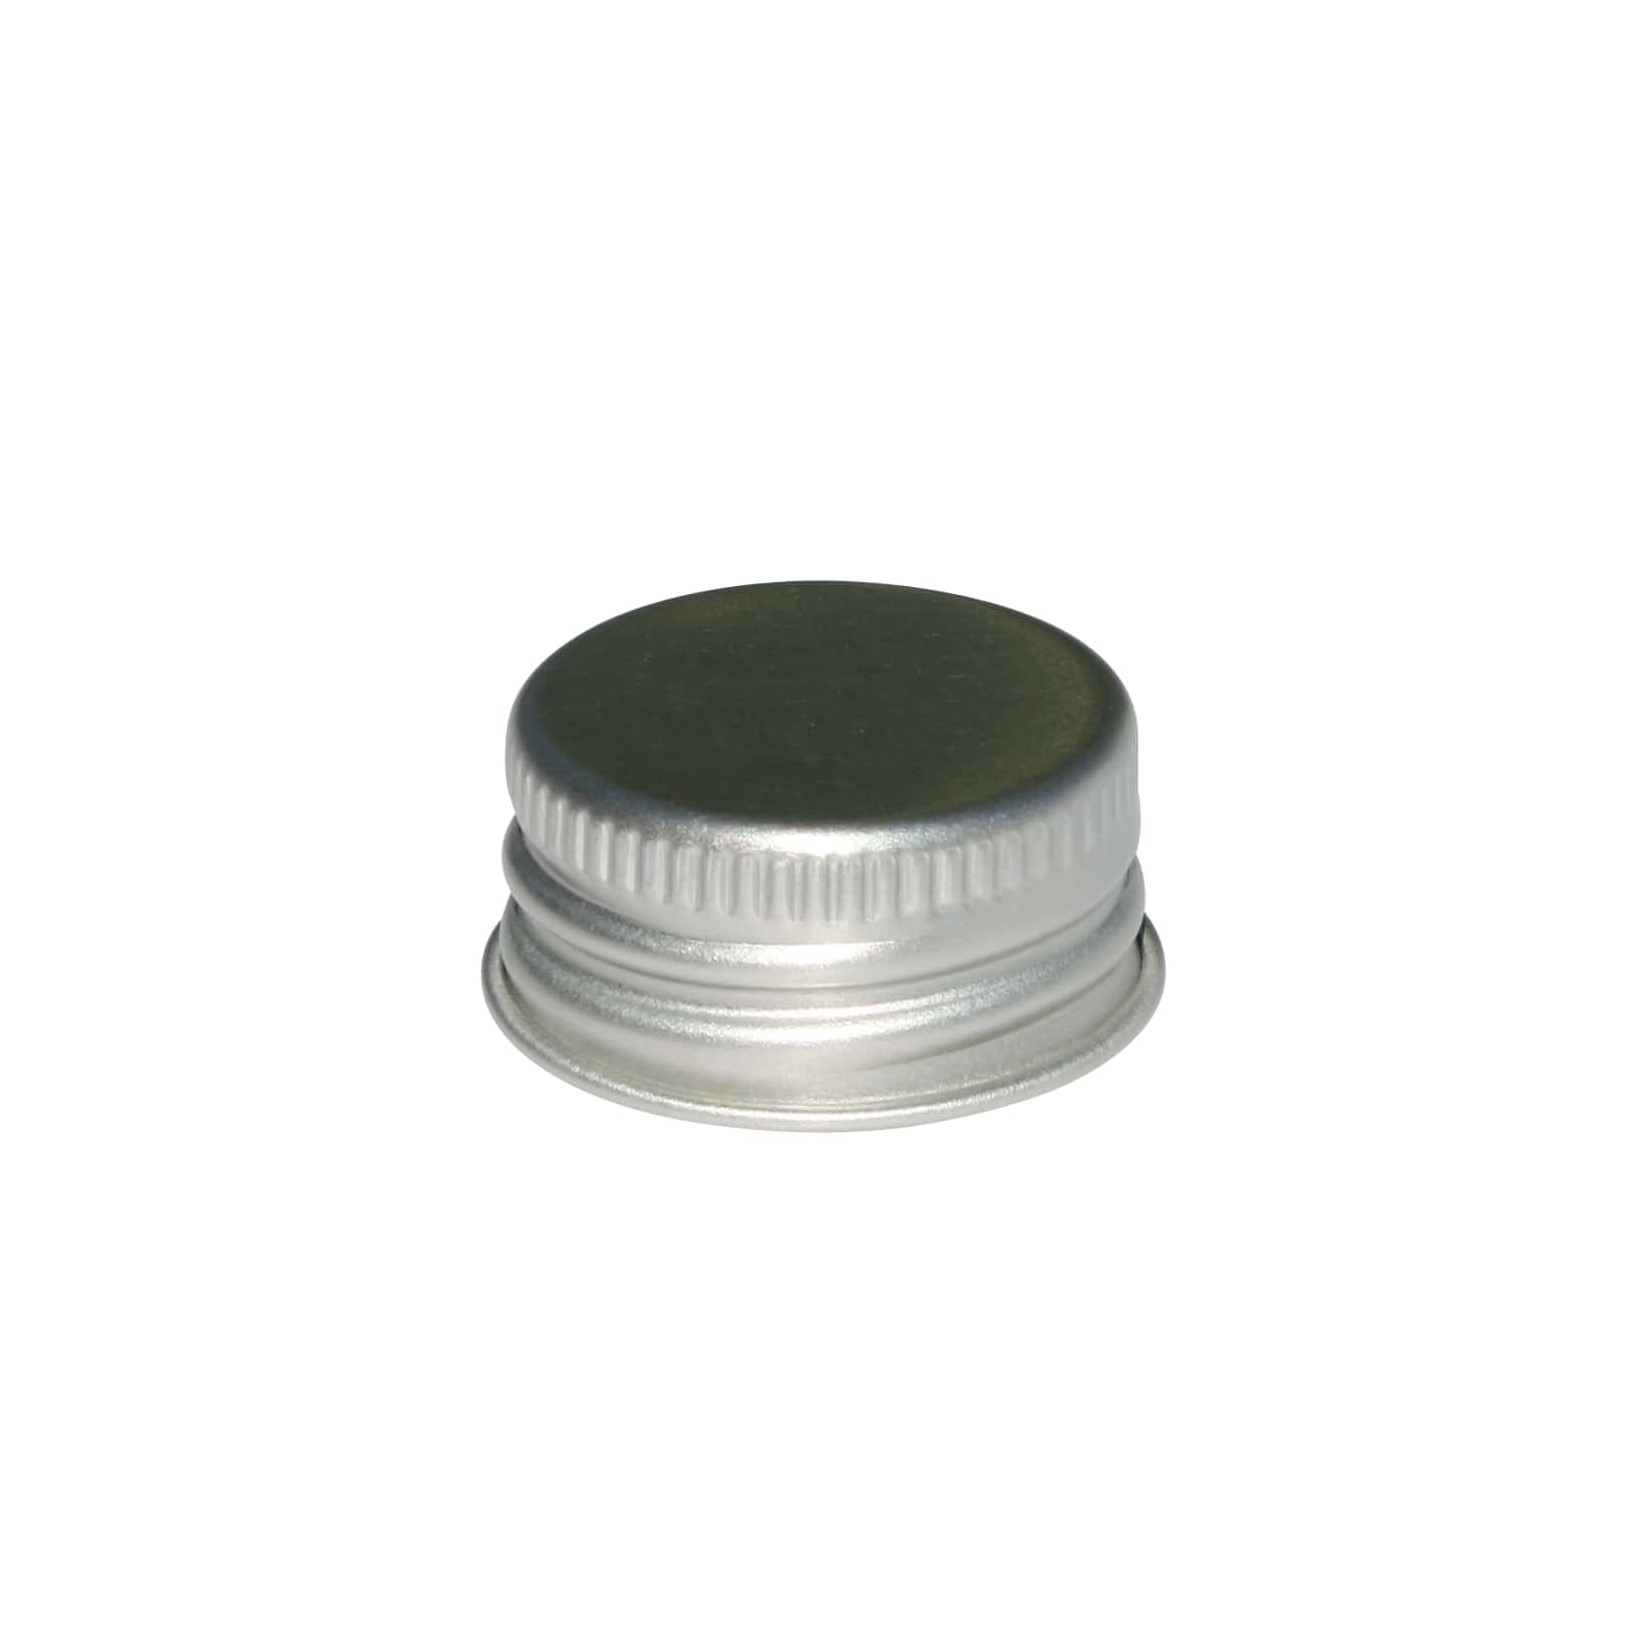 Screw cap, metal, silver, for opening: GPI 24/410